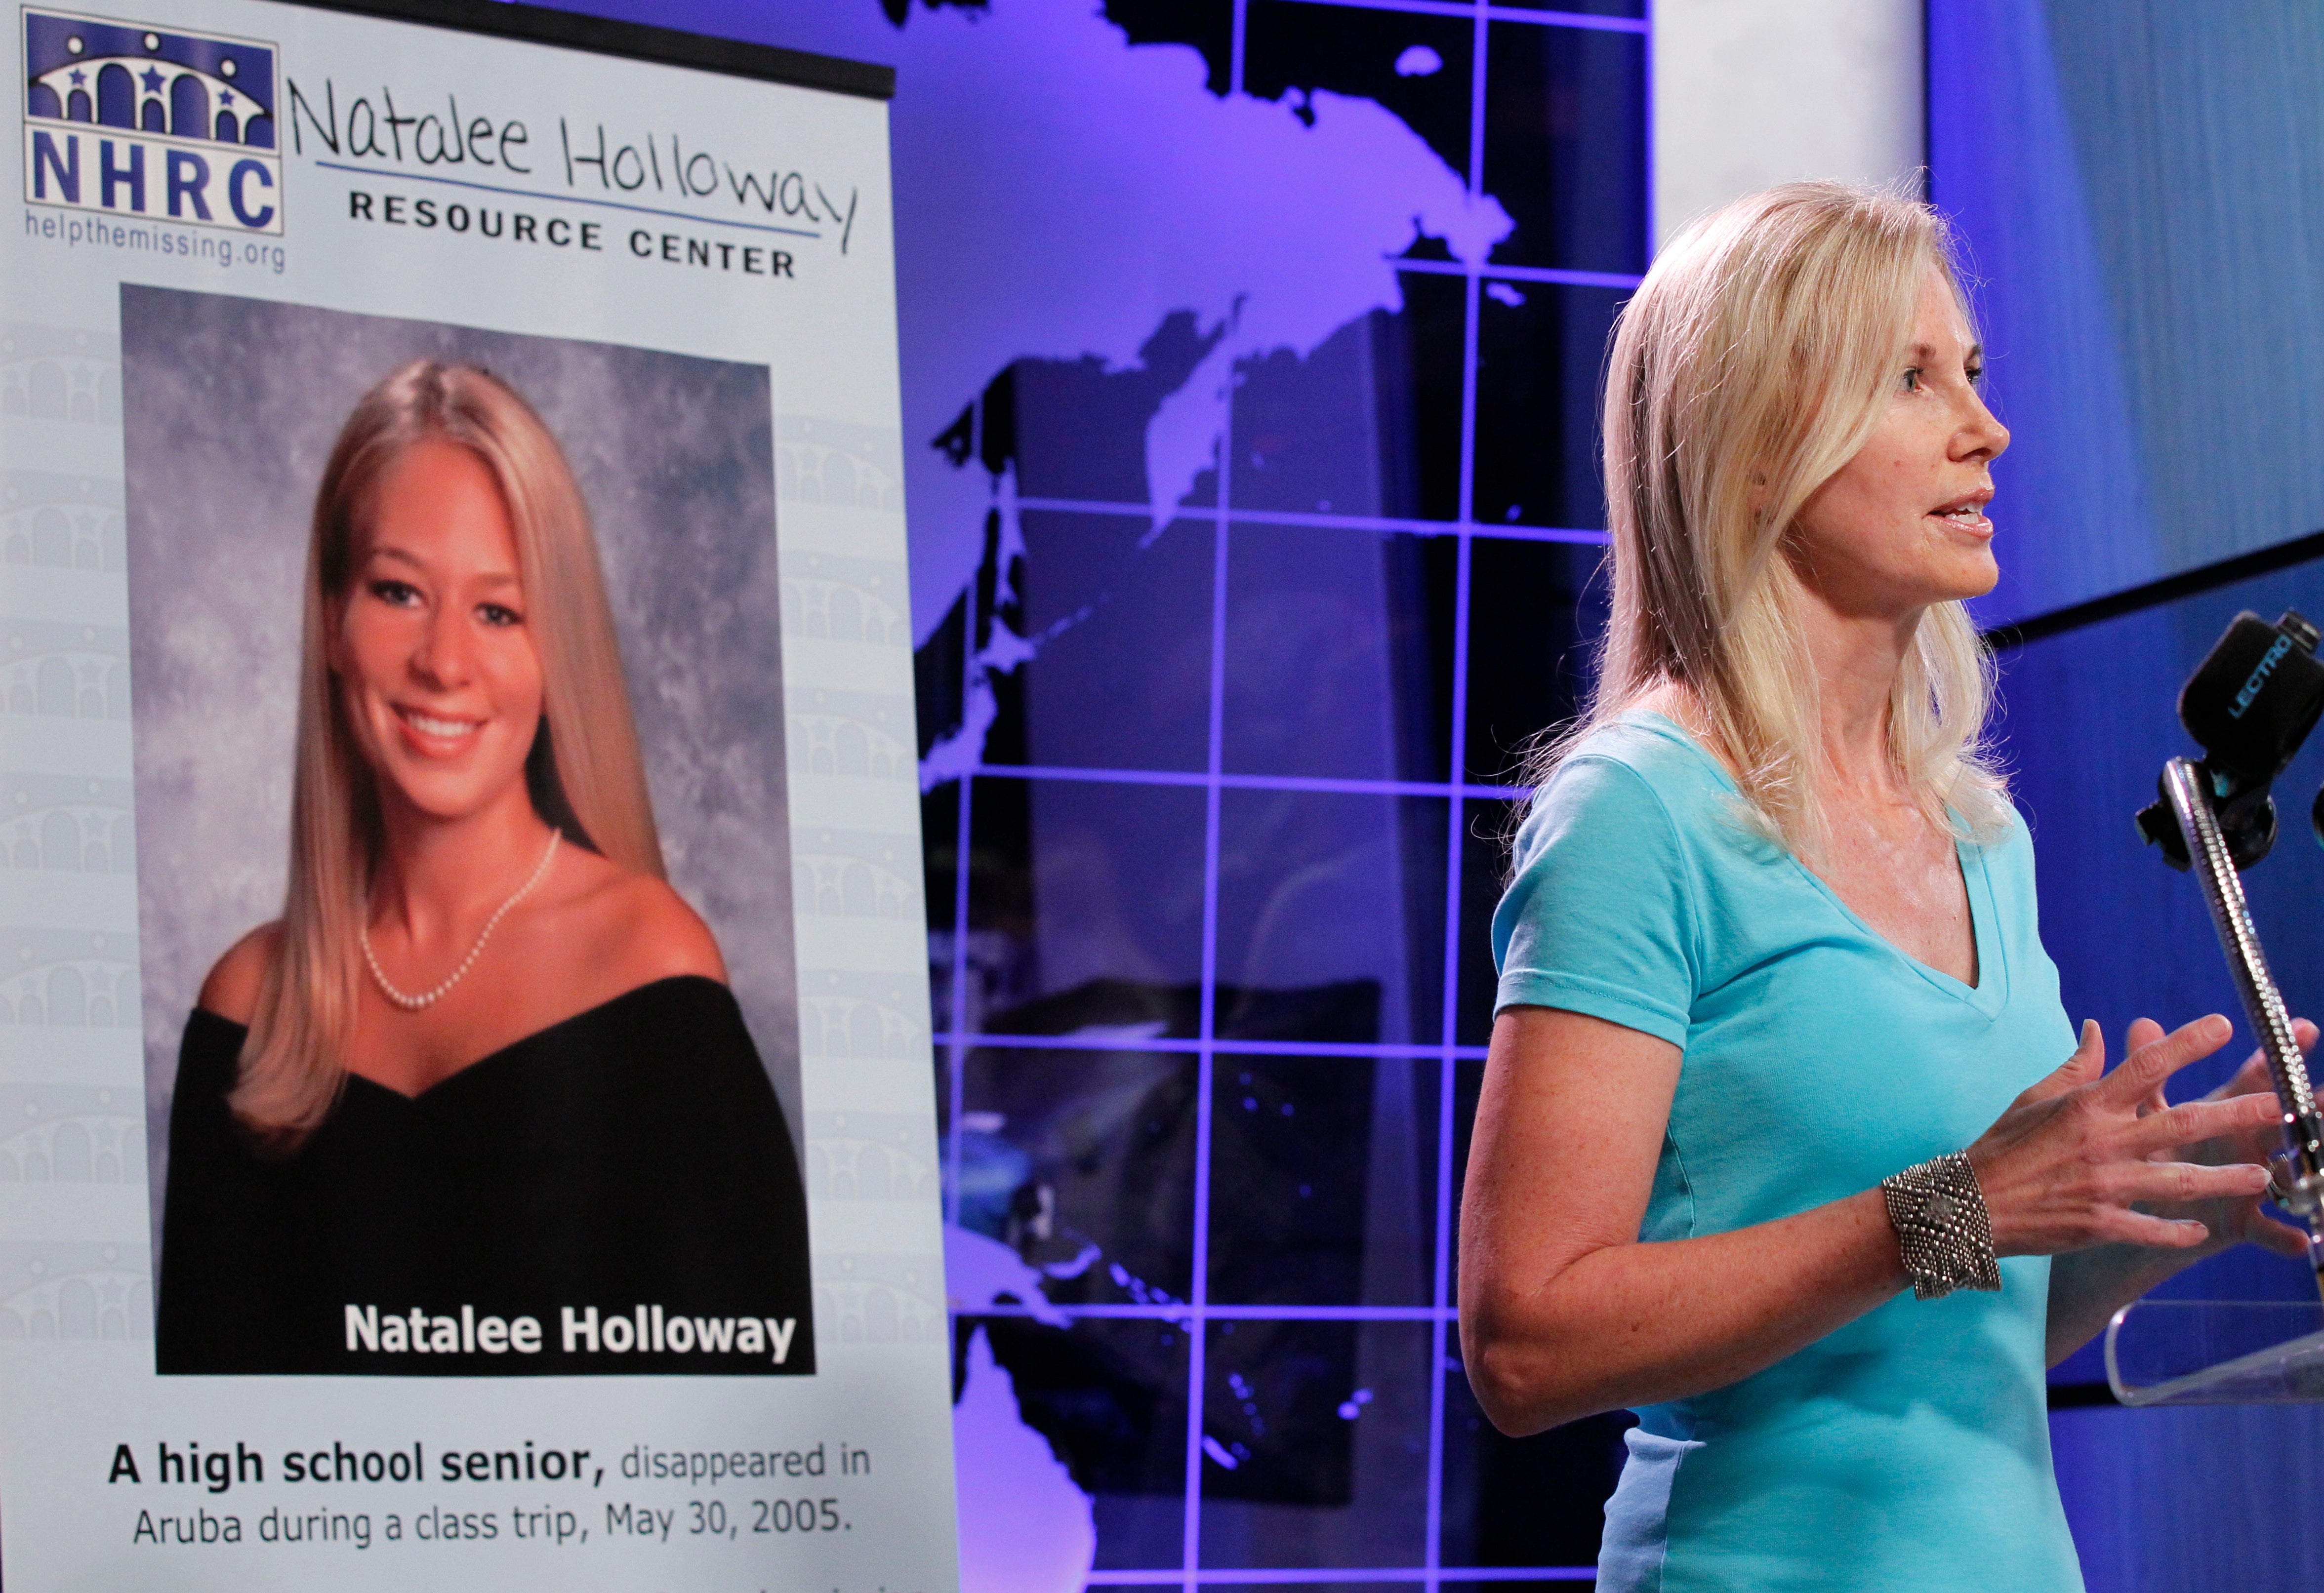 Beth Holloway, mother of Natalee Holloway, speaks during the opening of the Natalee Holloway Resource Center. She has been searching for answers for 18 years